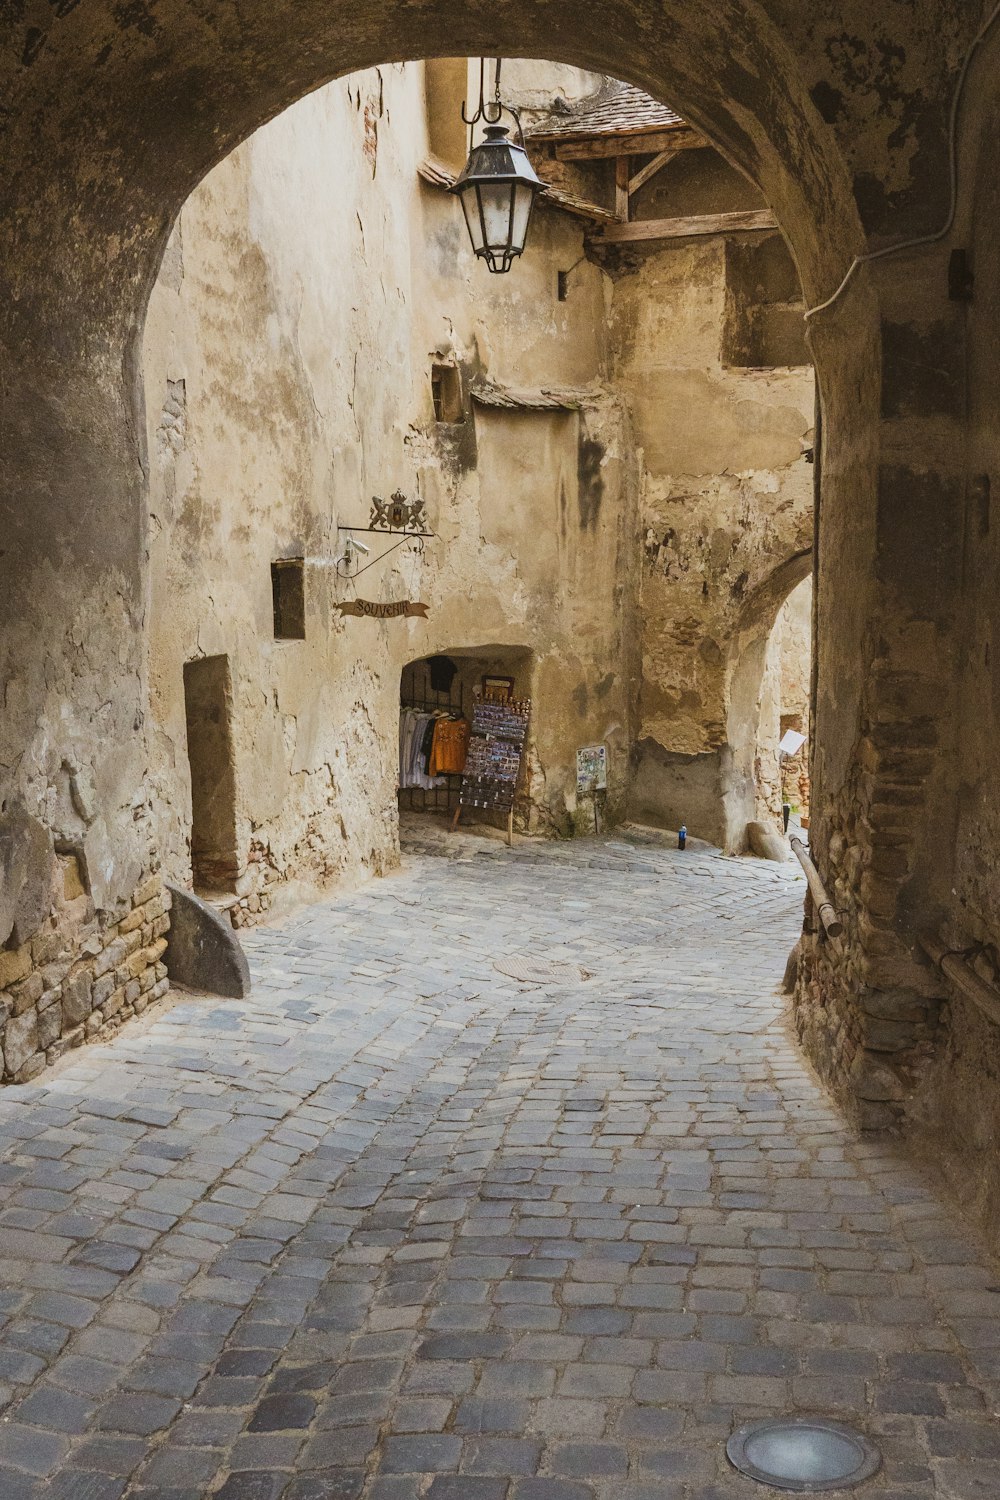 a cobblestone street with a lantern hanging from the ceiling